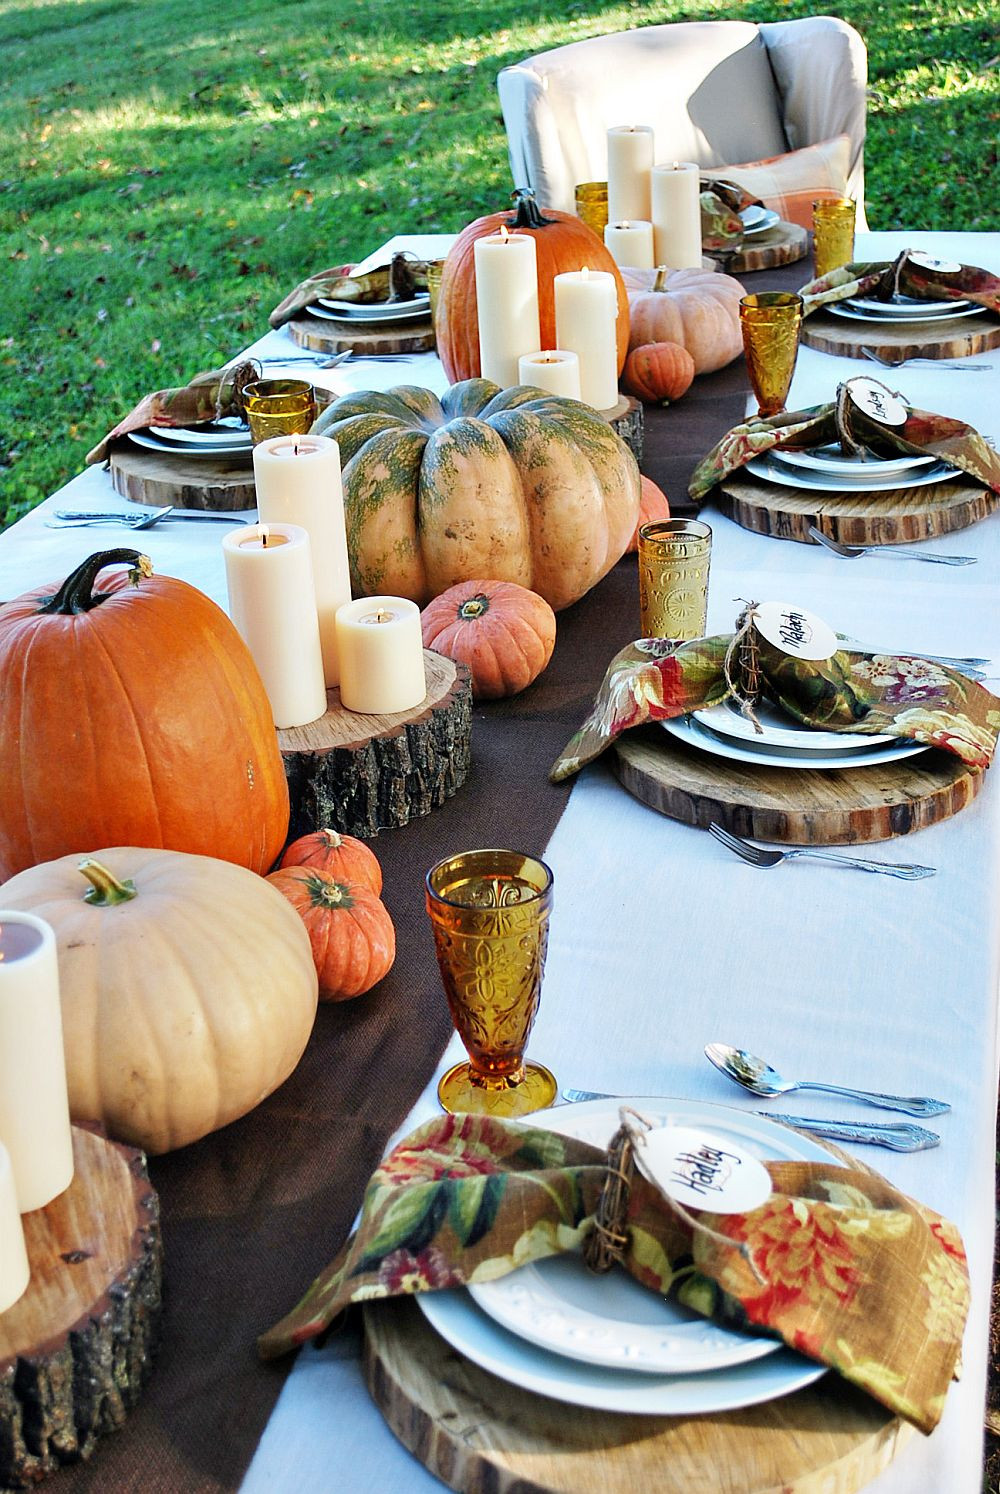 Rustic Thanksgiving Decor
 15 Outdoor Thanksgiving Table Settings for Dining Alfresco